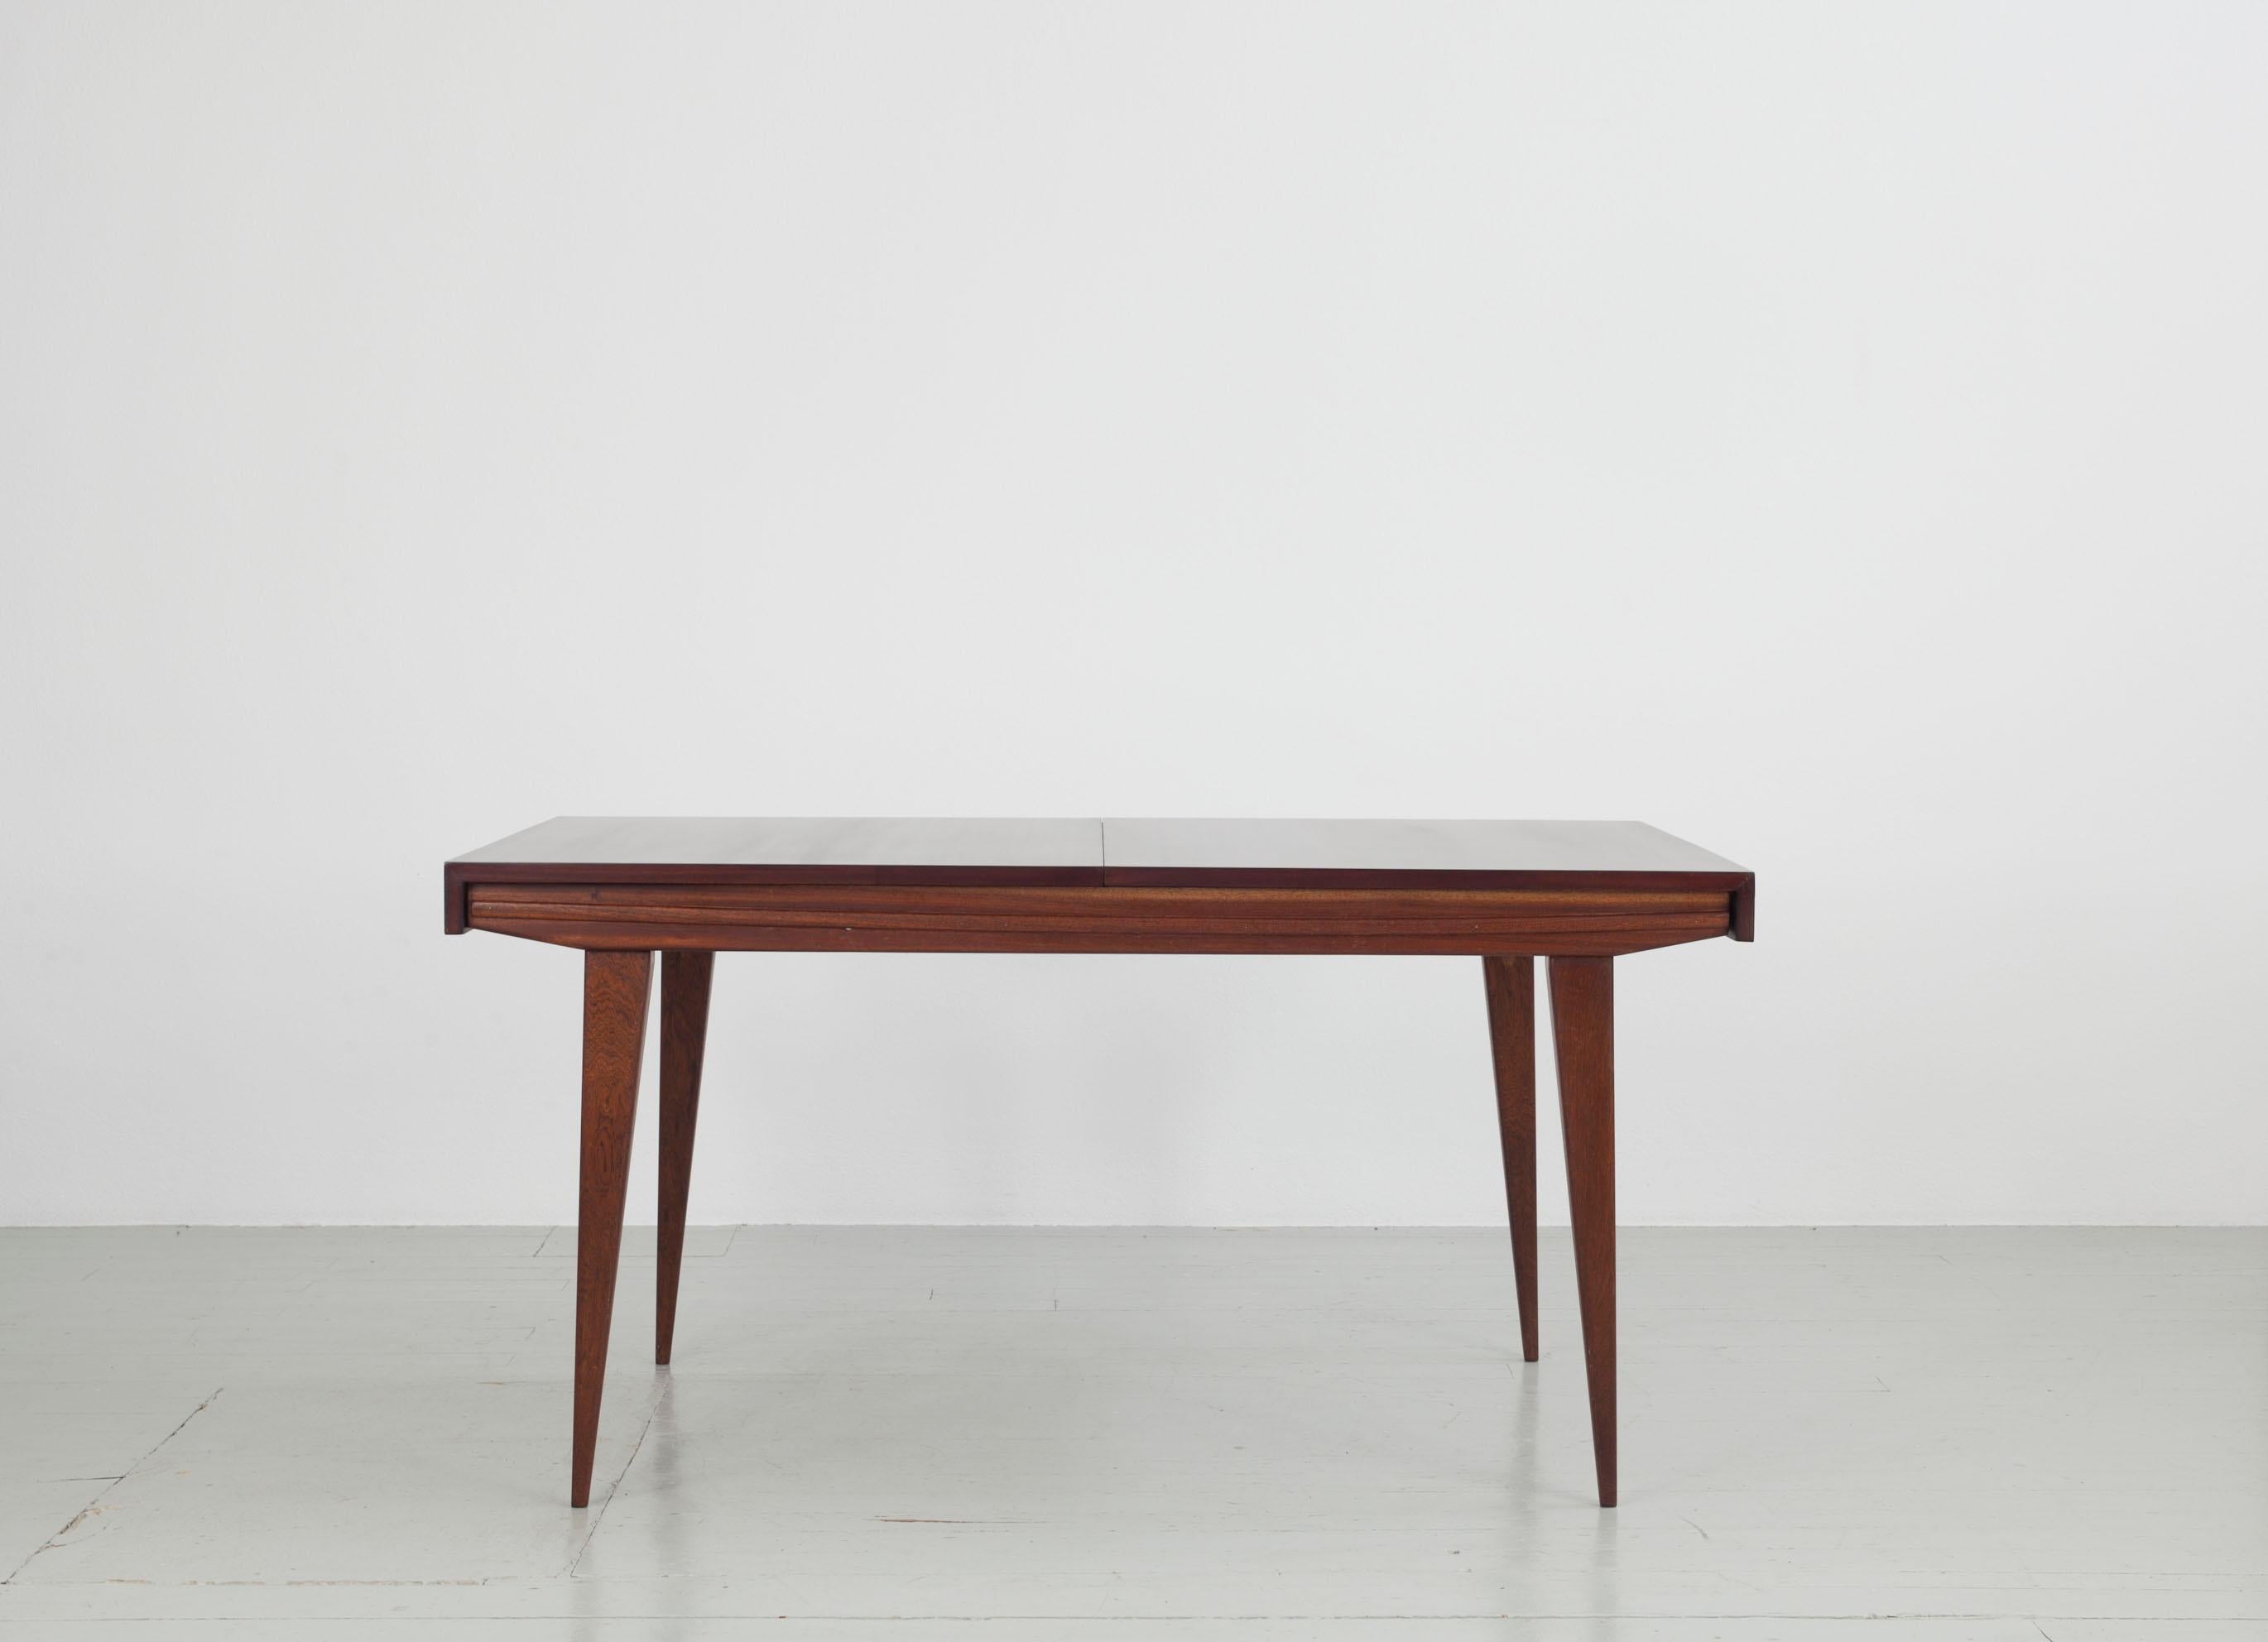 Extendable dinning table by Maurice Pré, designed in France in the 1950s.